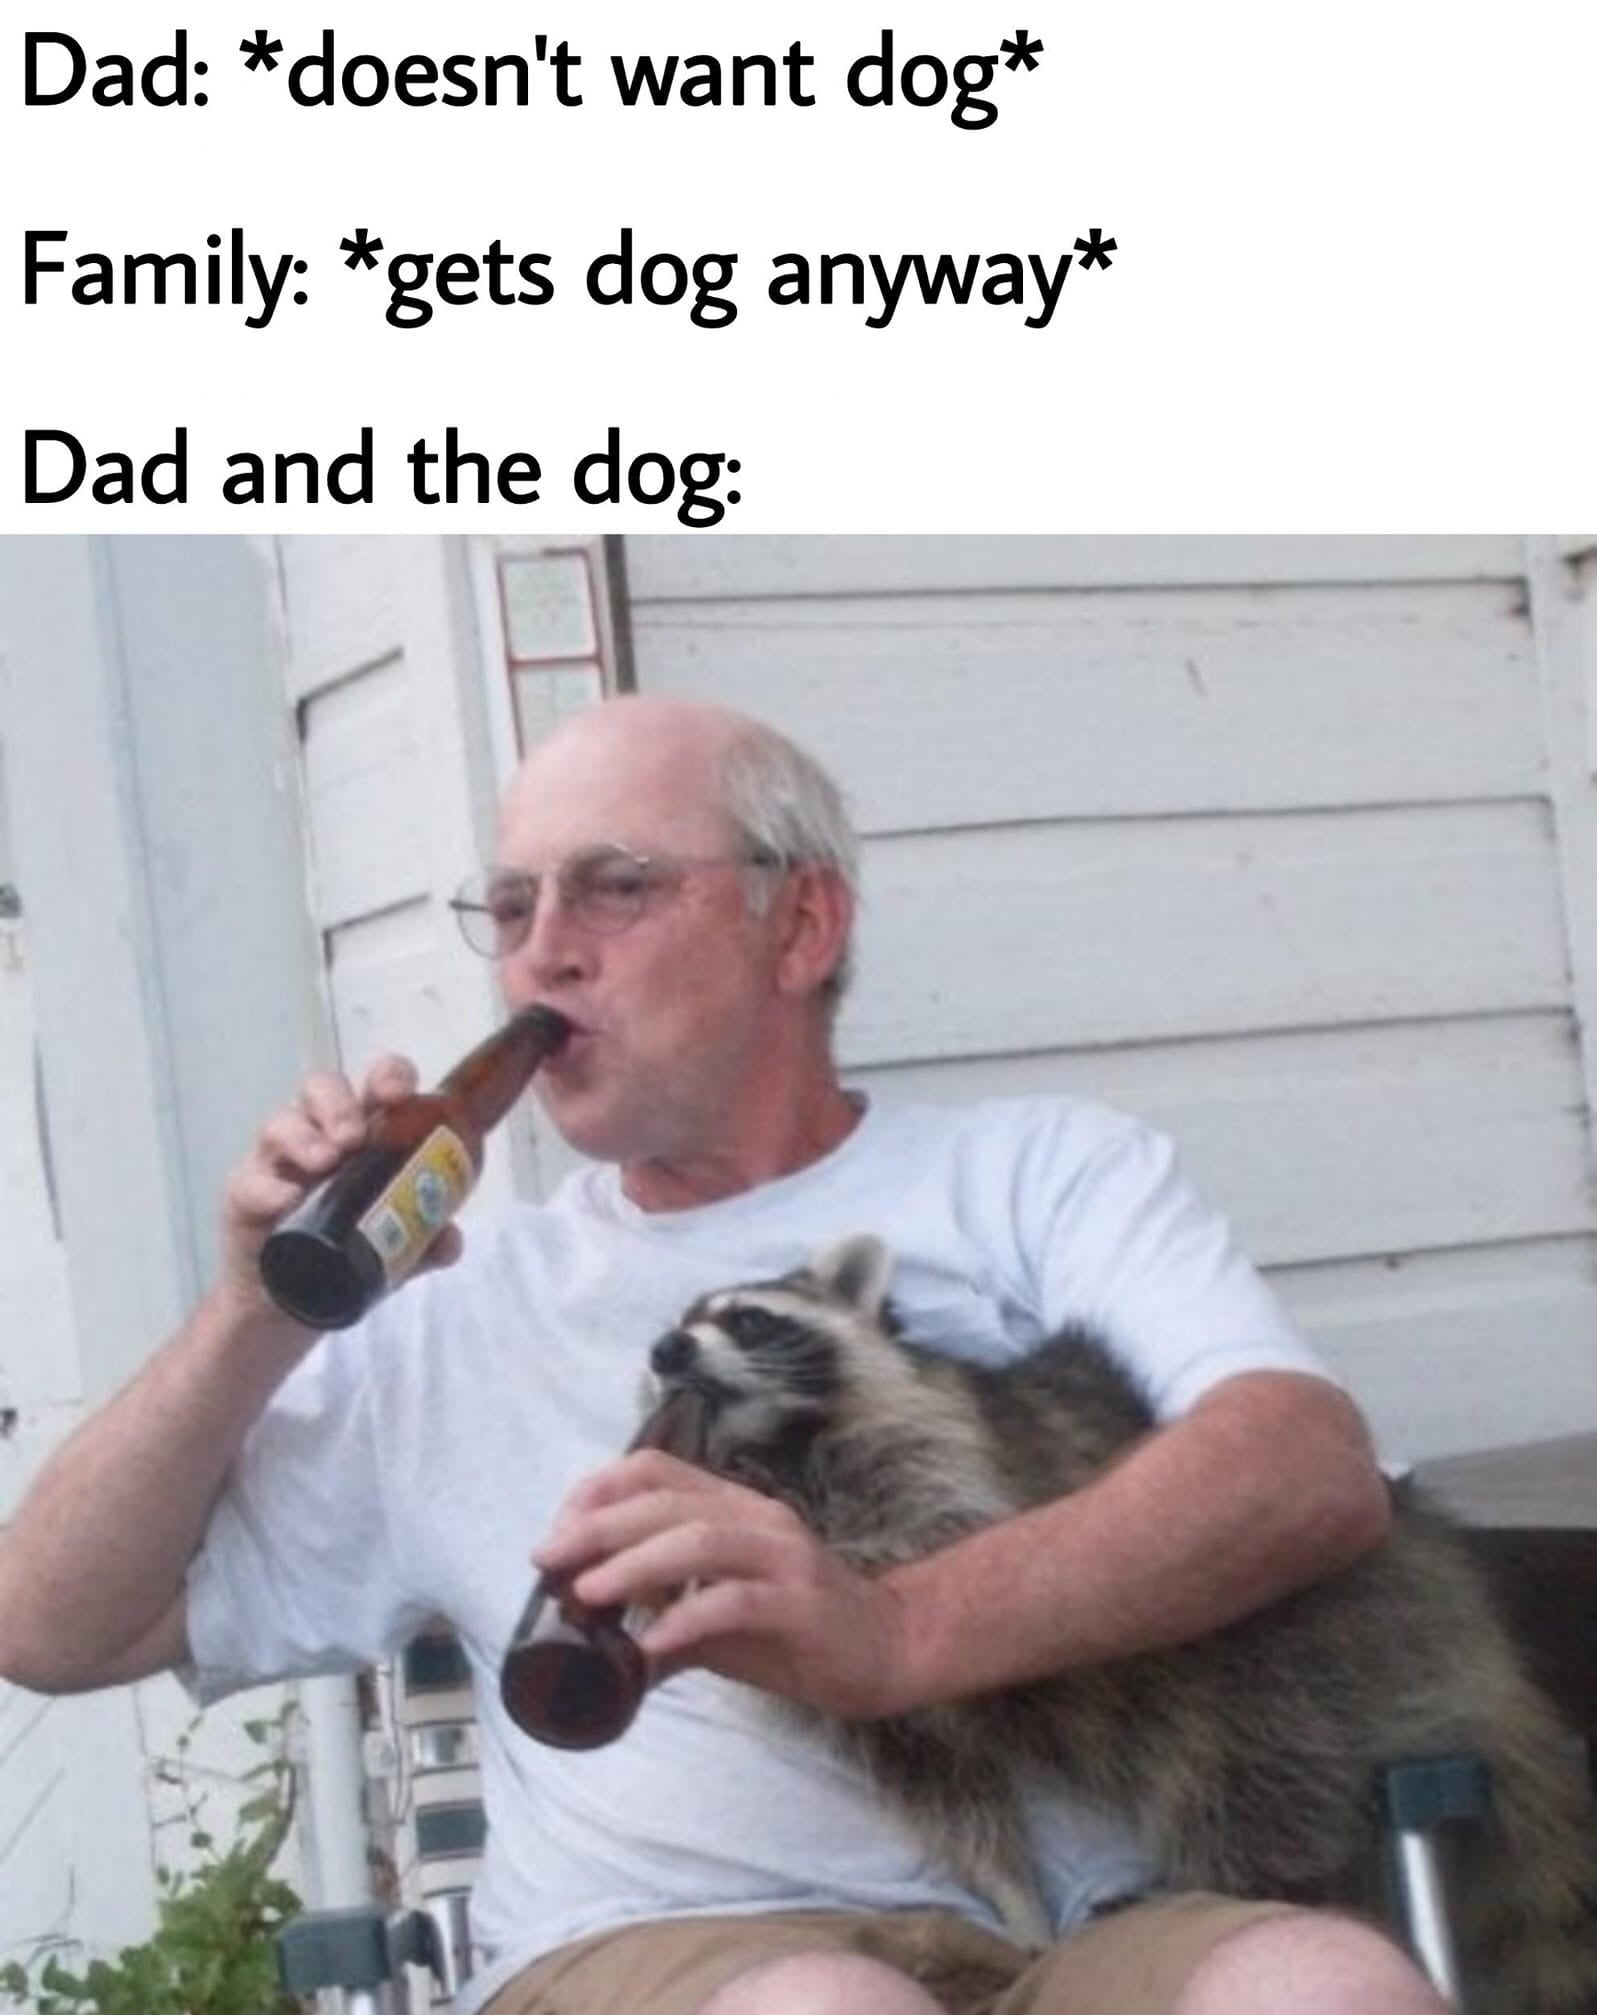 dad doesn t want dog meme - Dad doesn't want dog Family gets dog anyway Dad and the dog